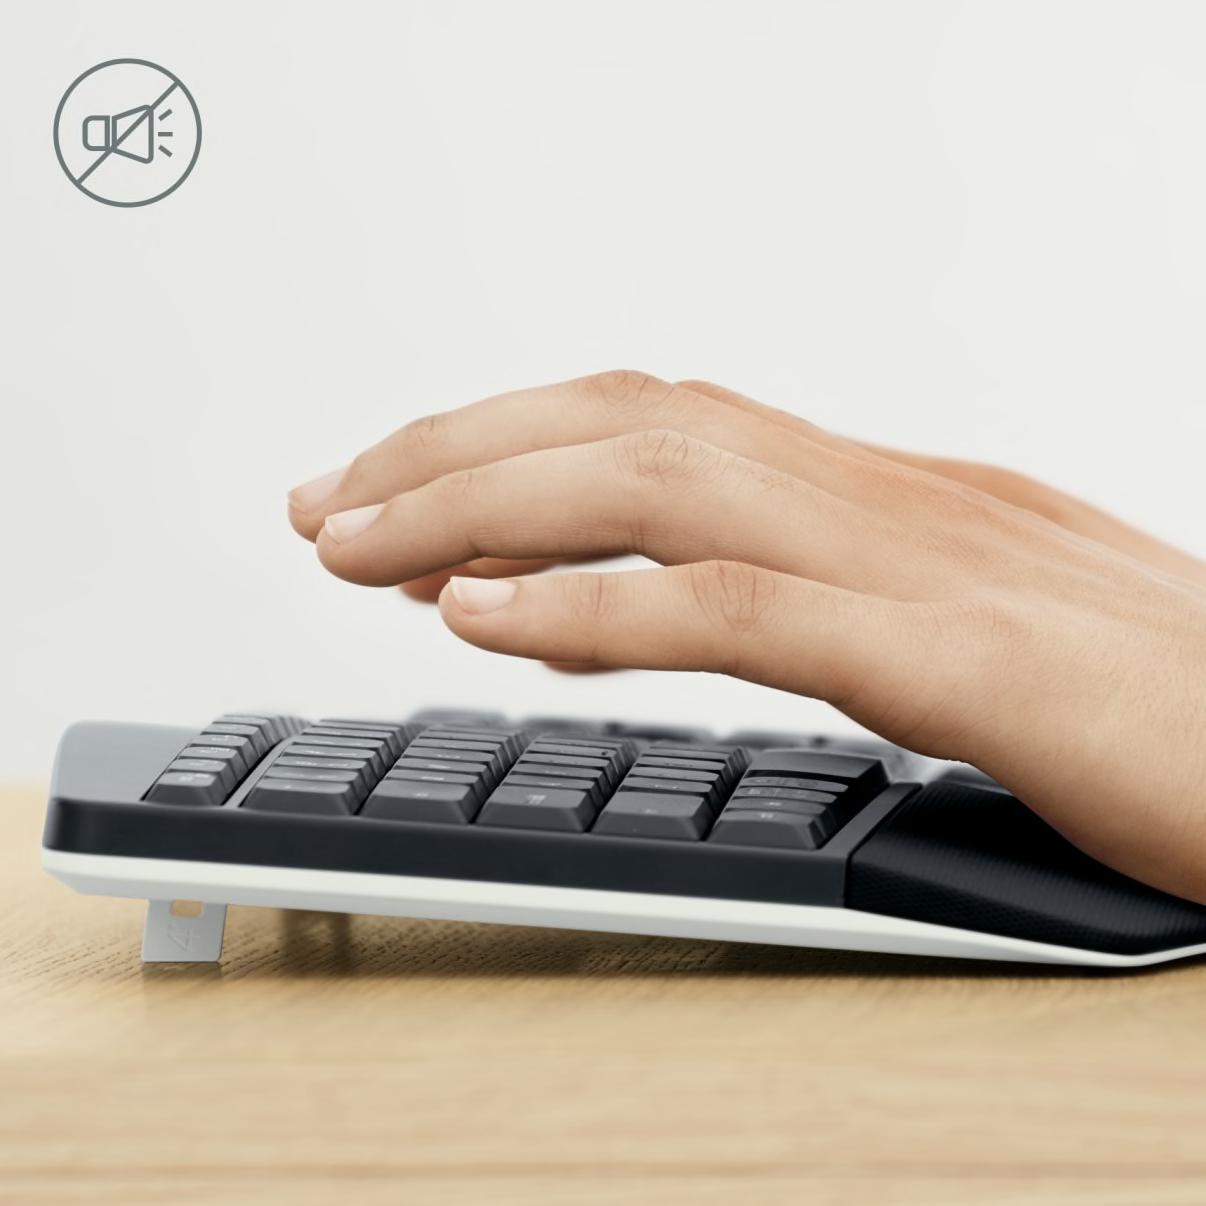 Enhance productivity with your keyboard